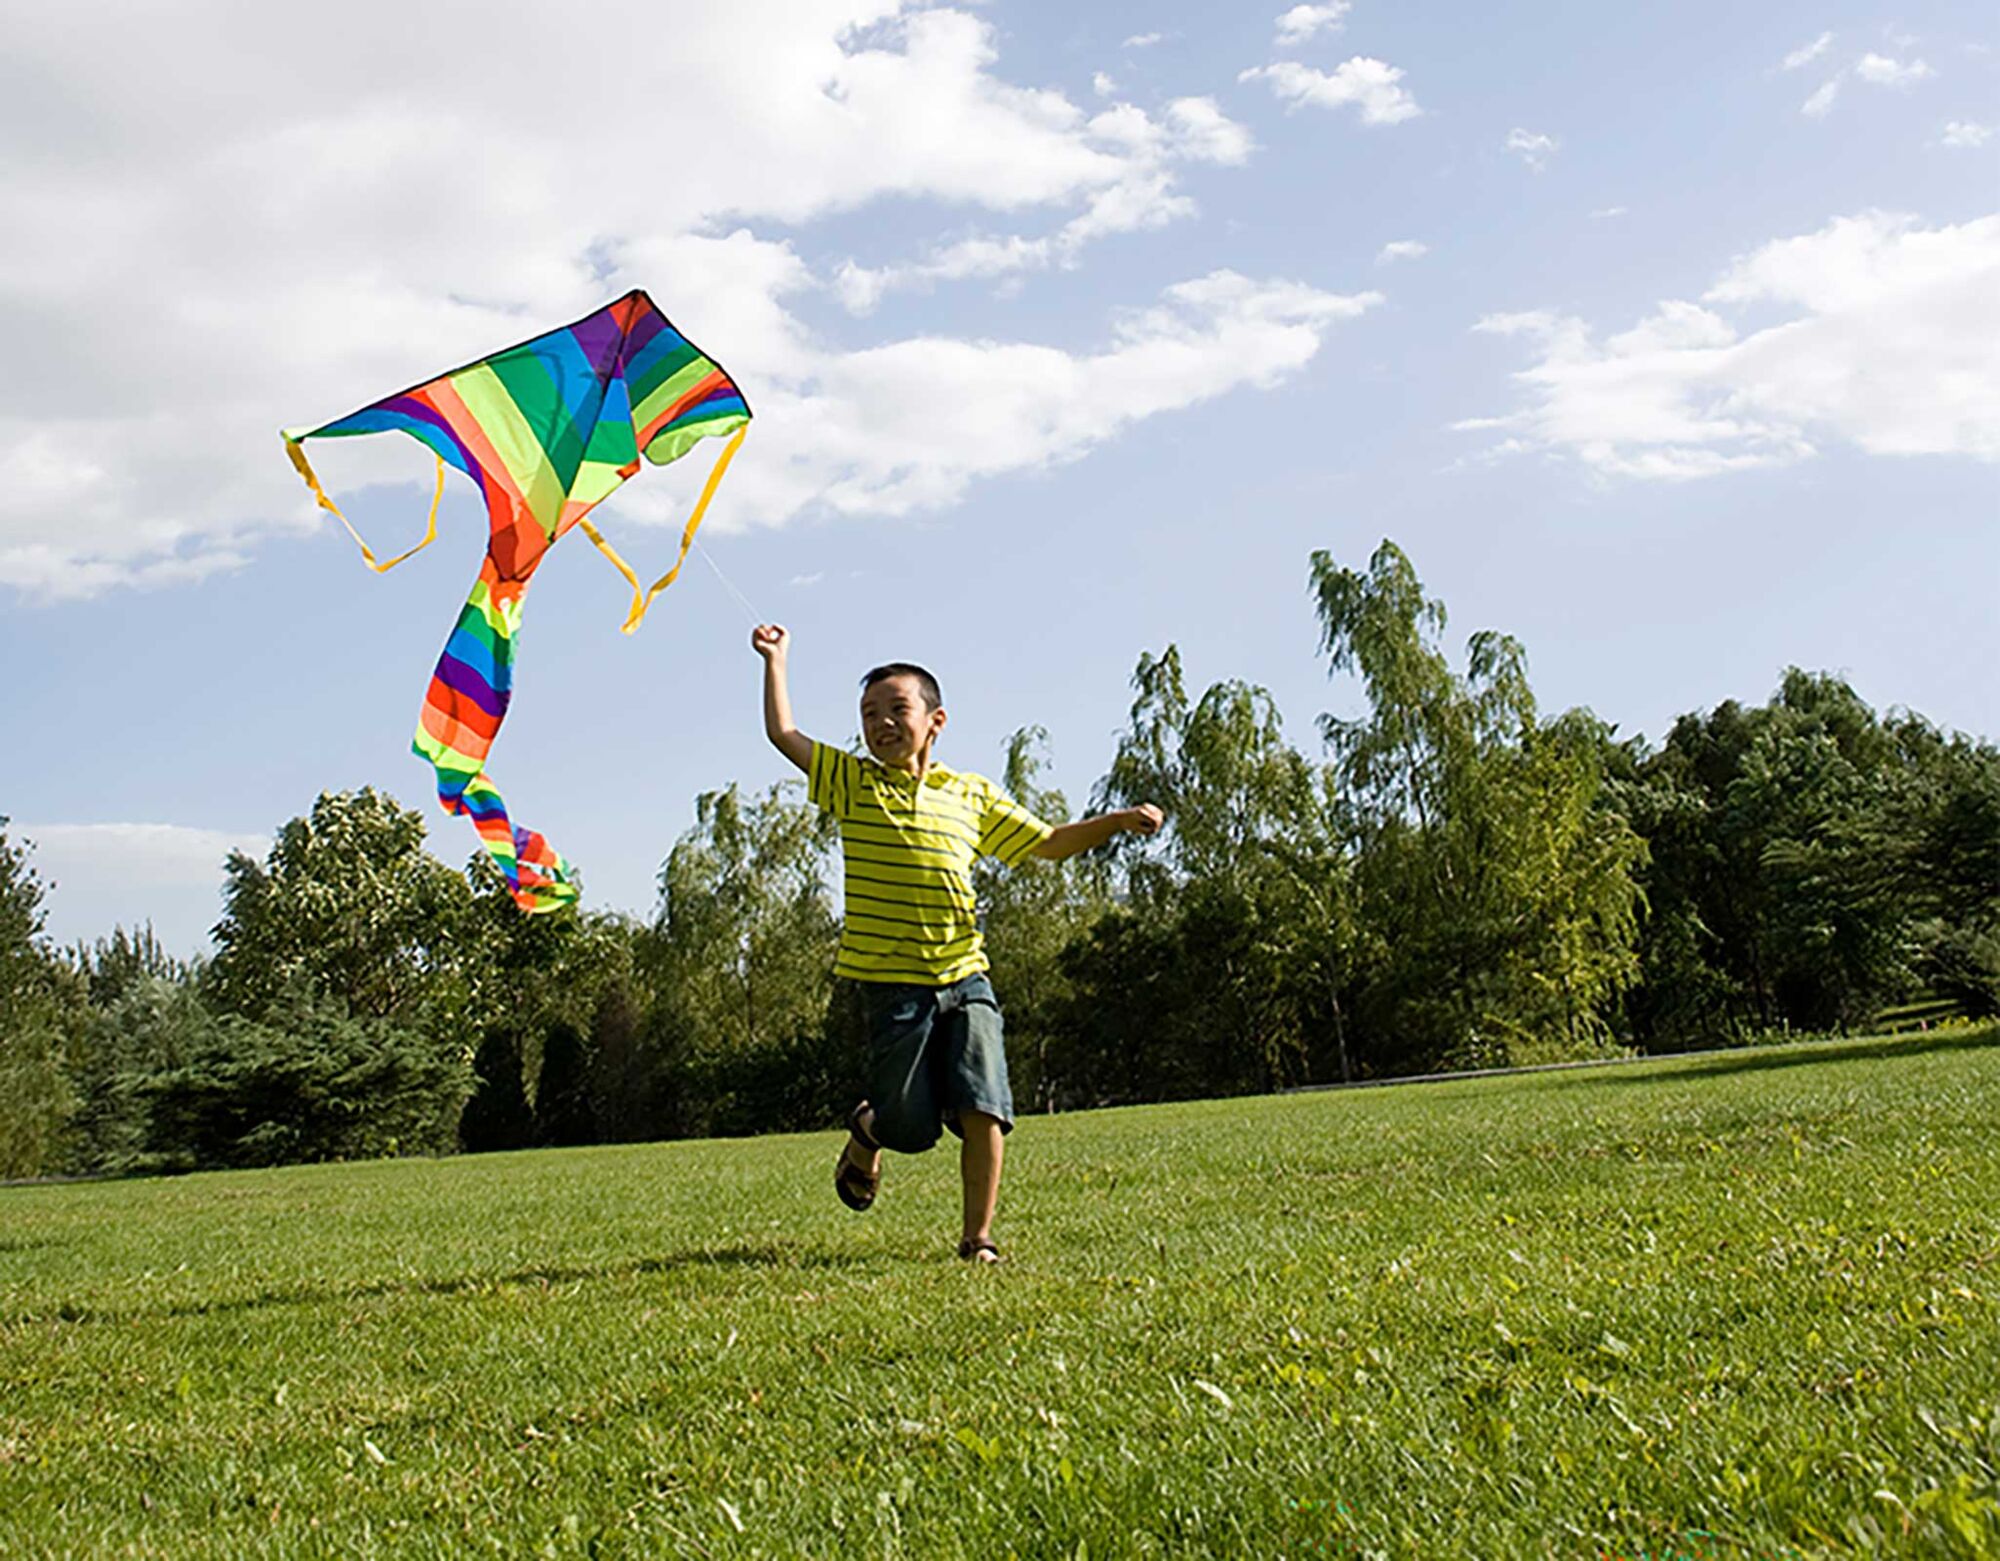 A child playing with a multi colored kite in the middle of a green field.